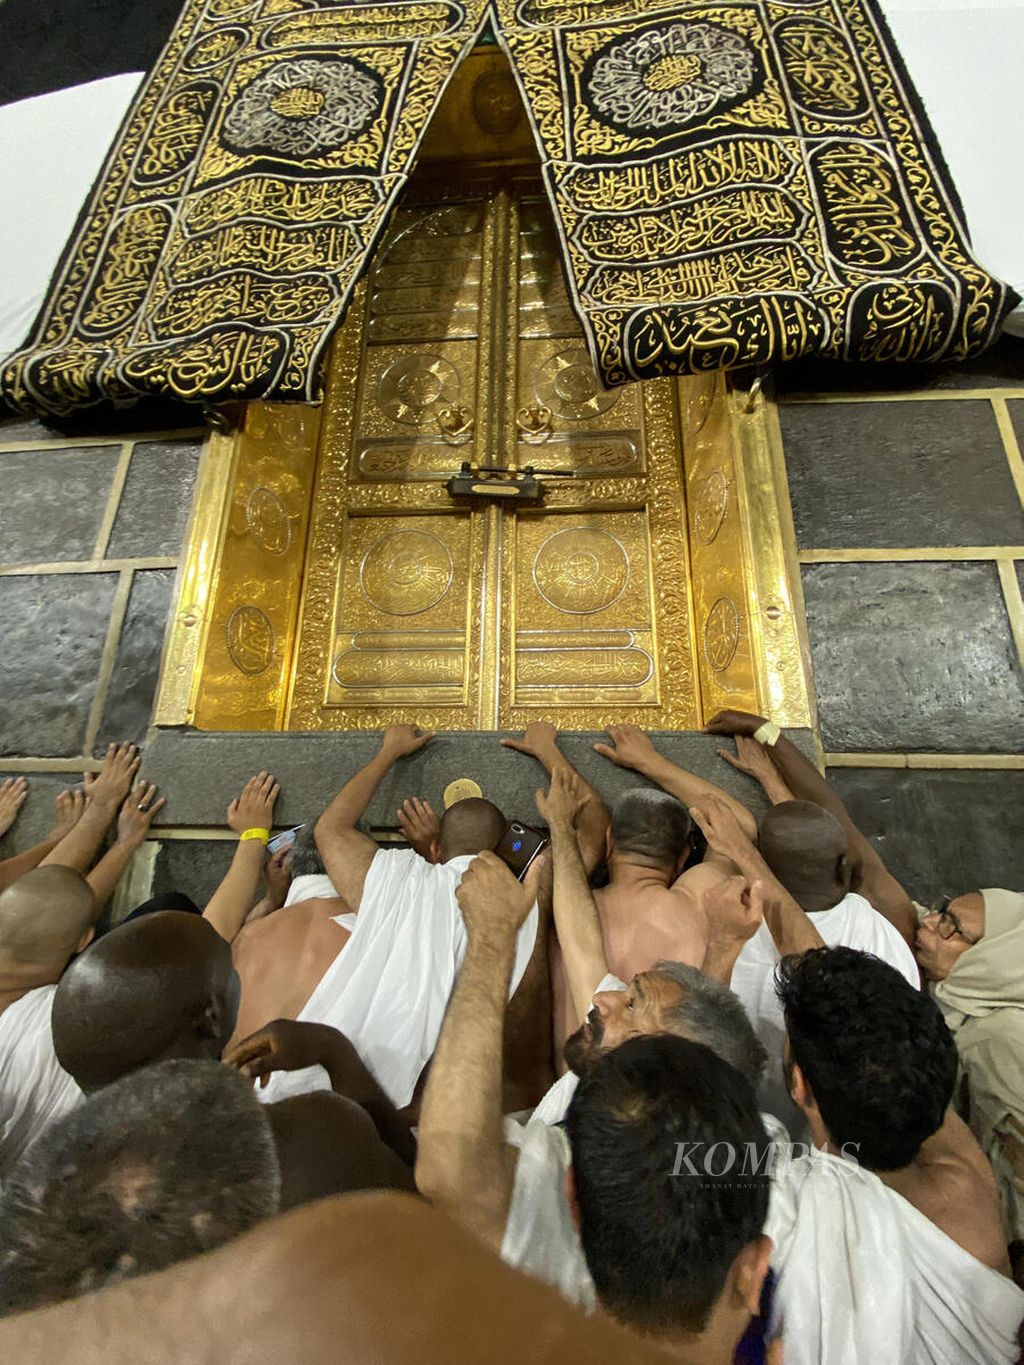 Worshippers attempt to touch the door of the Kaaba after performing the circumambulation or prayer while circling the Kaaba in the area of Masjid al-Haram, Mecca, Saudi Arabia, on Wednesday (14/6/2023) early morning. Circumambulation is a part of the Umrah ritual that is also performed by pilgrims while awaiting the hajj season.